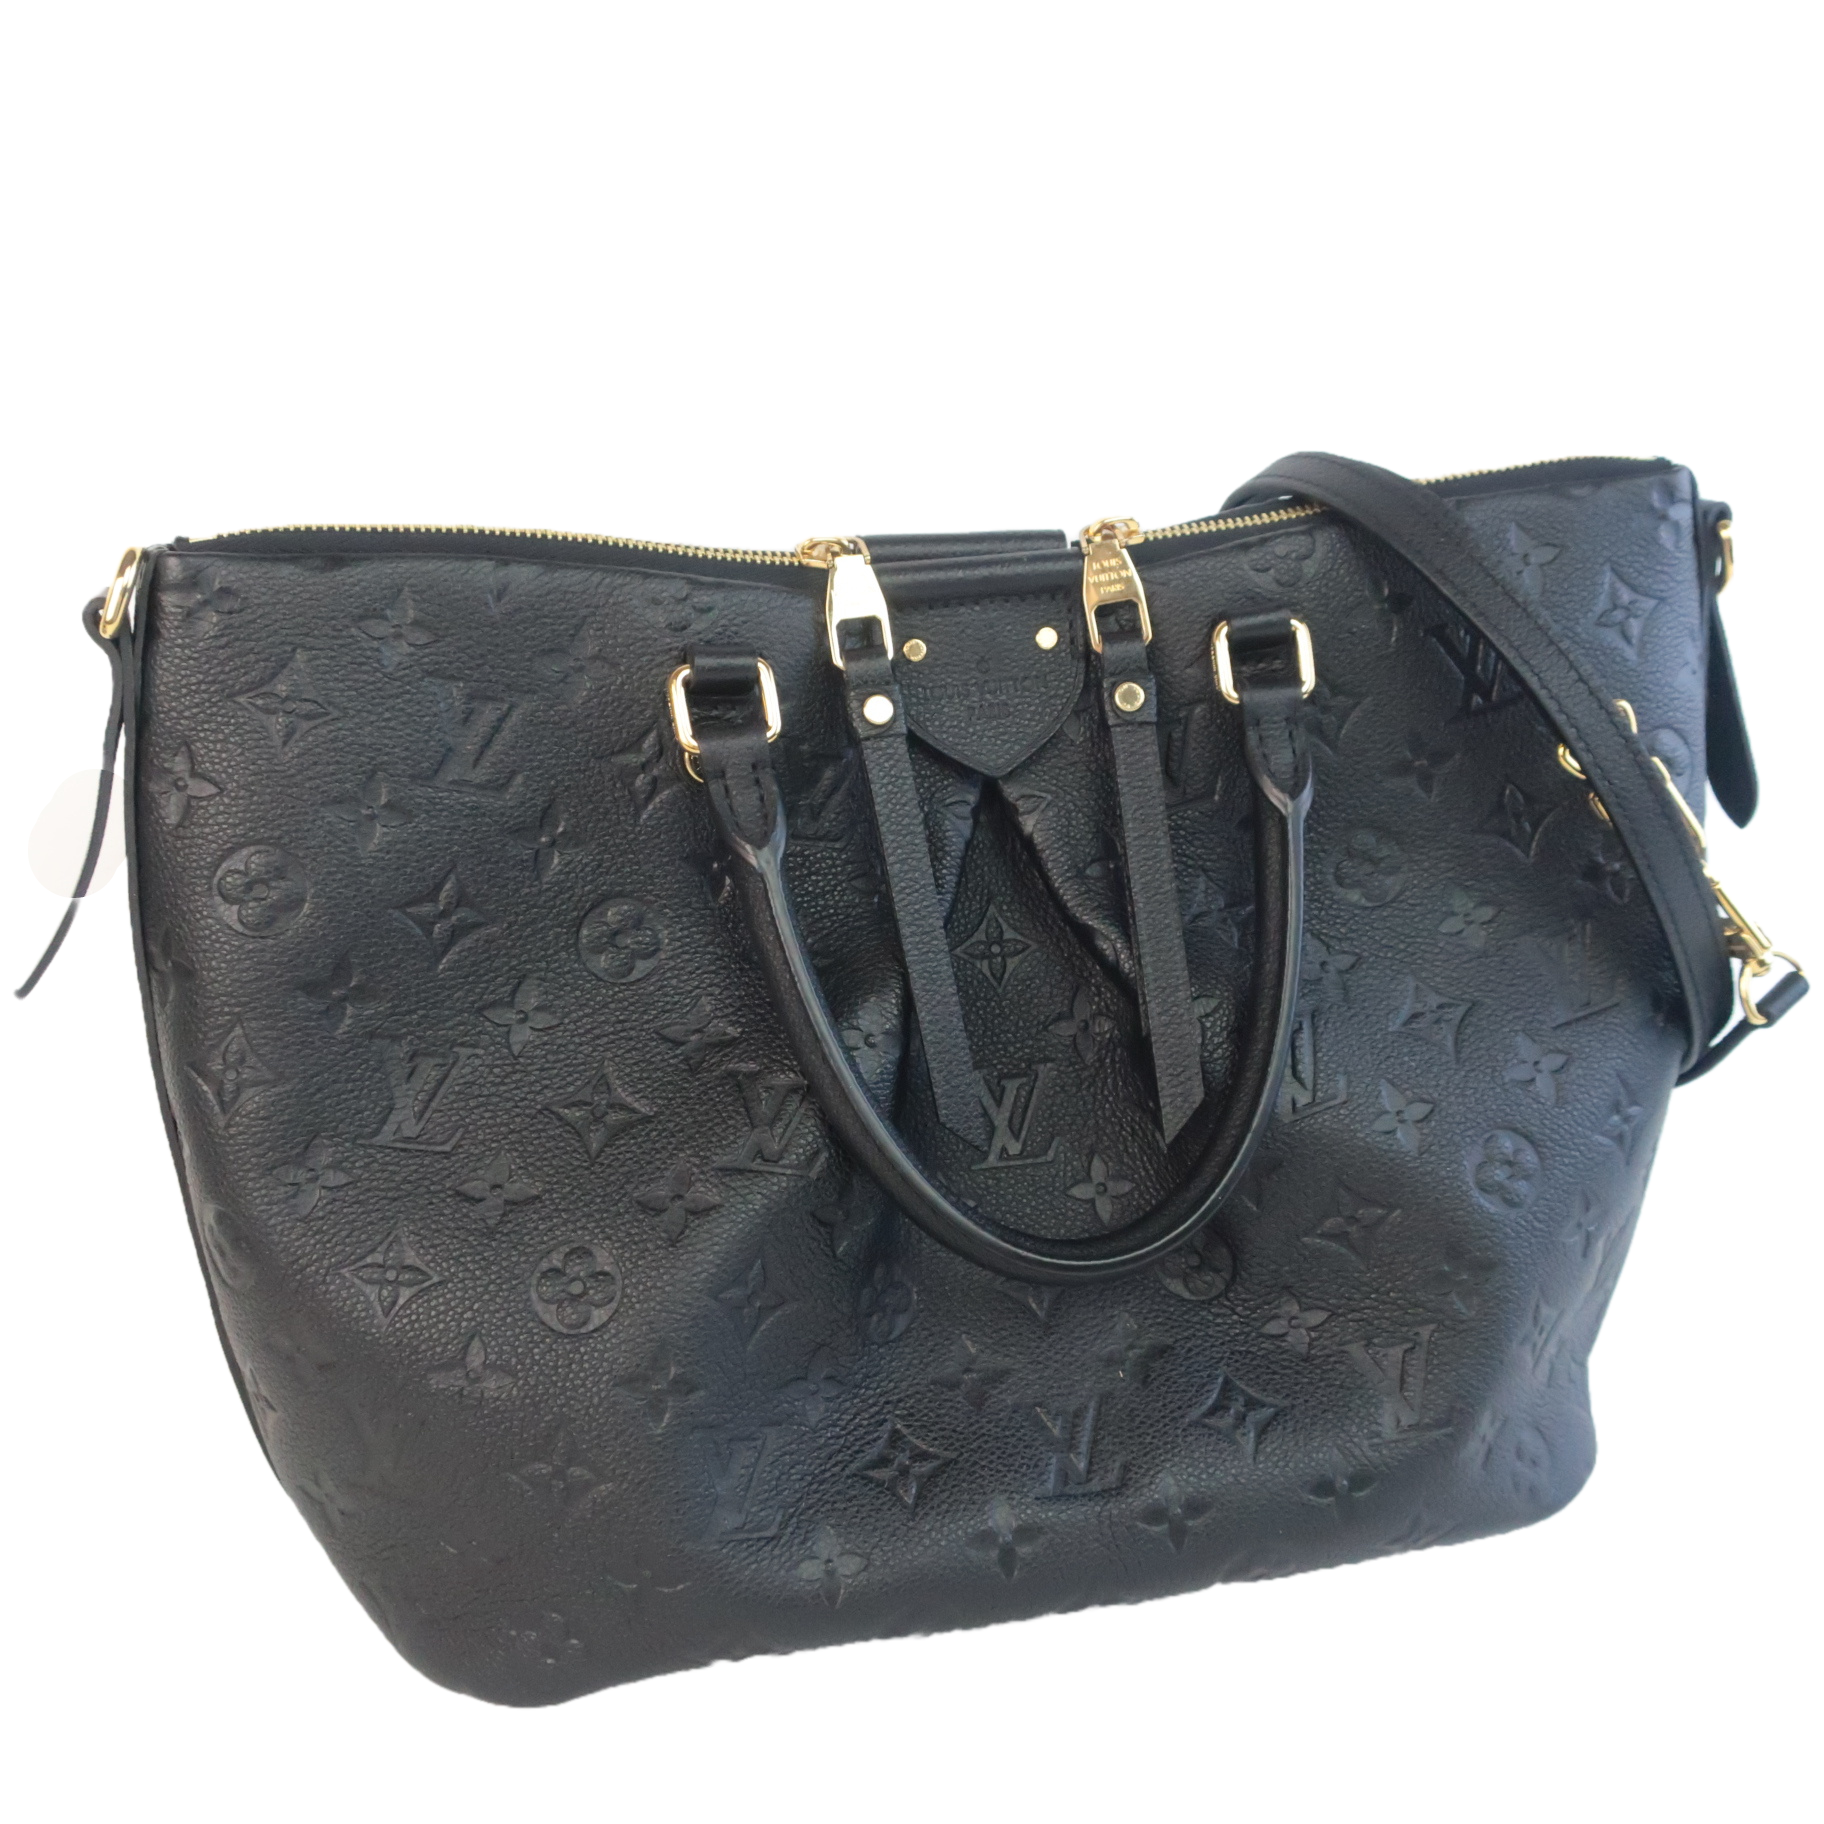 Top 10 Black Louis Vuitton Purses That Will Dress Up Any Outfit – Bagaholic